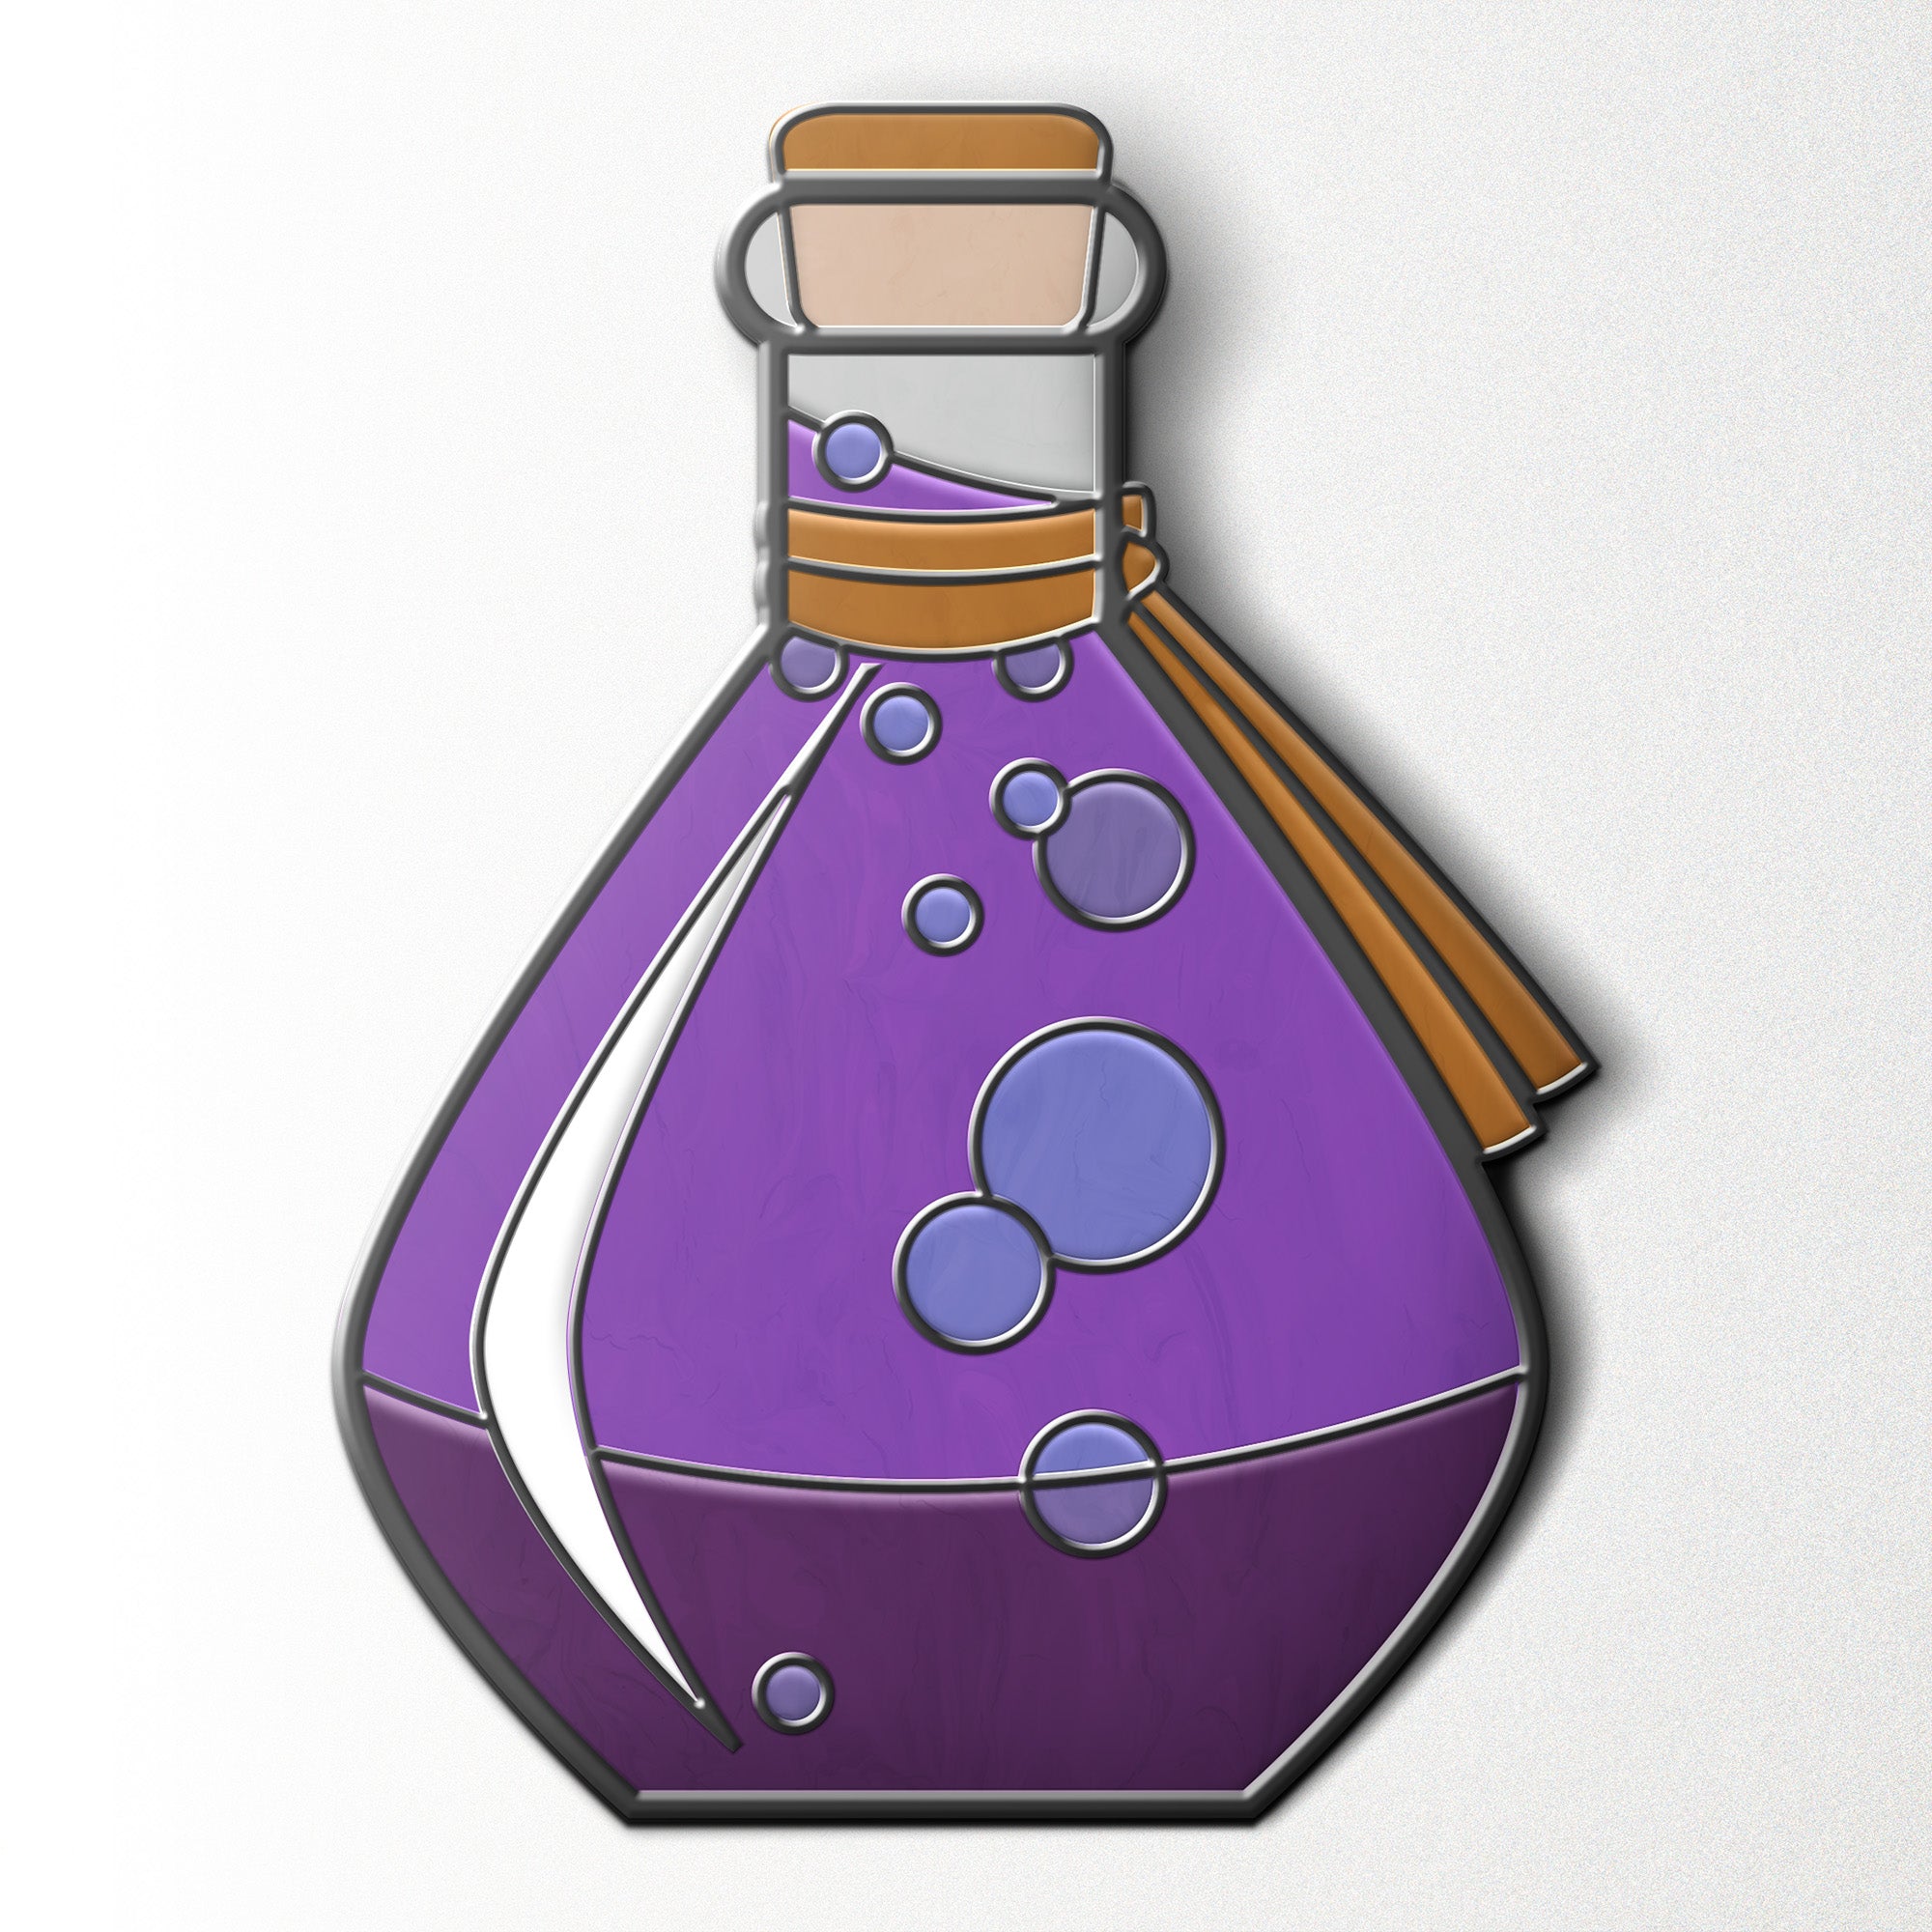 Potion Bottle - Hard Enamel Adventure Dice Pin Metal by Norse Foundry